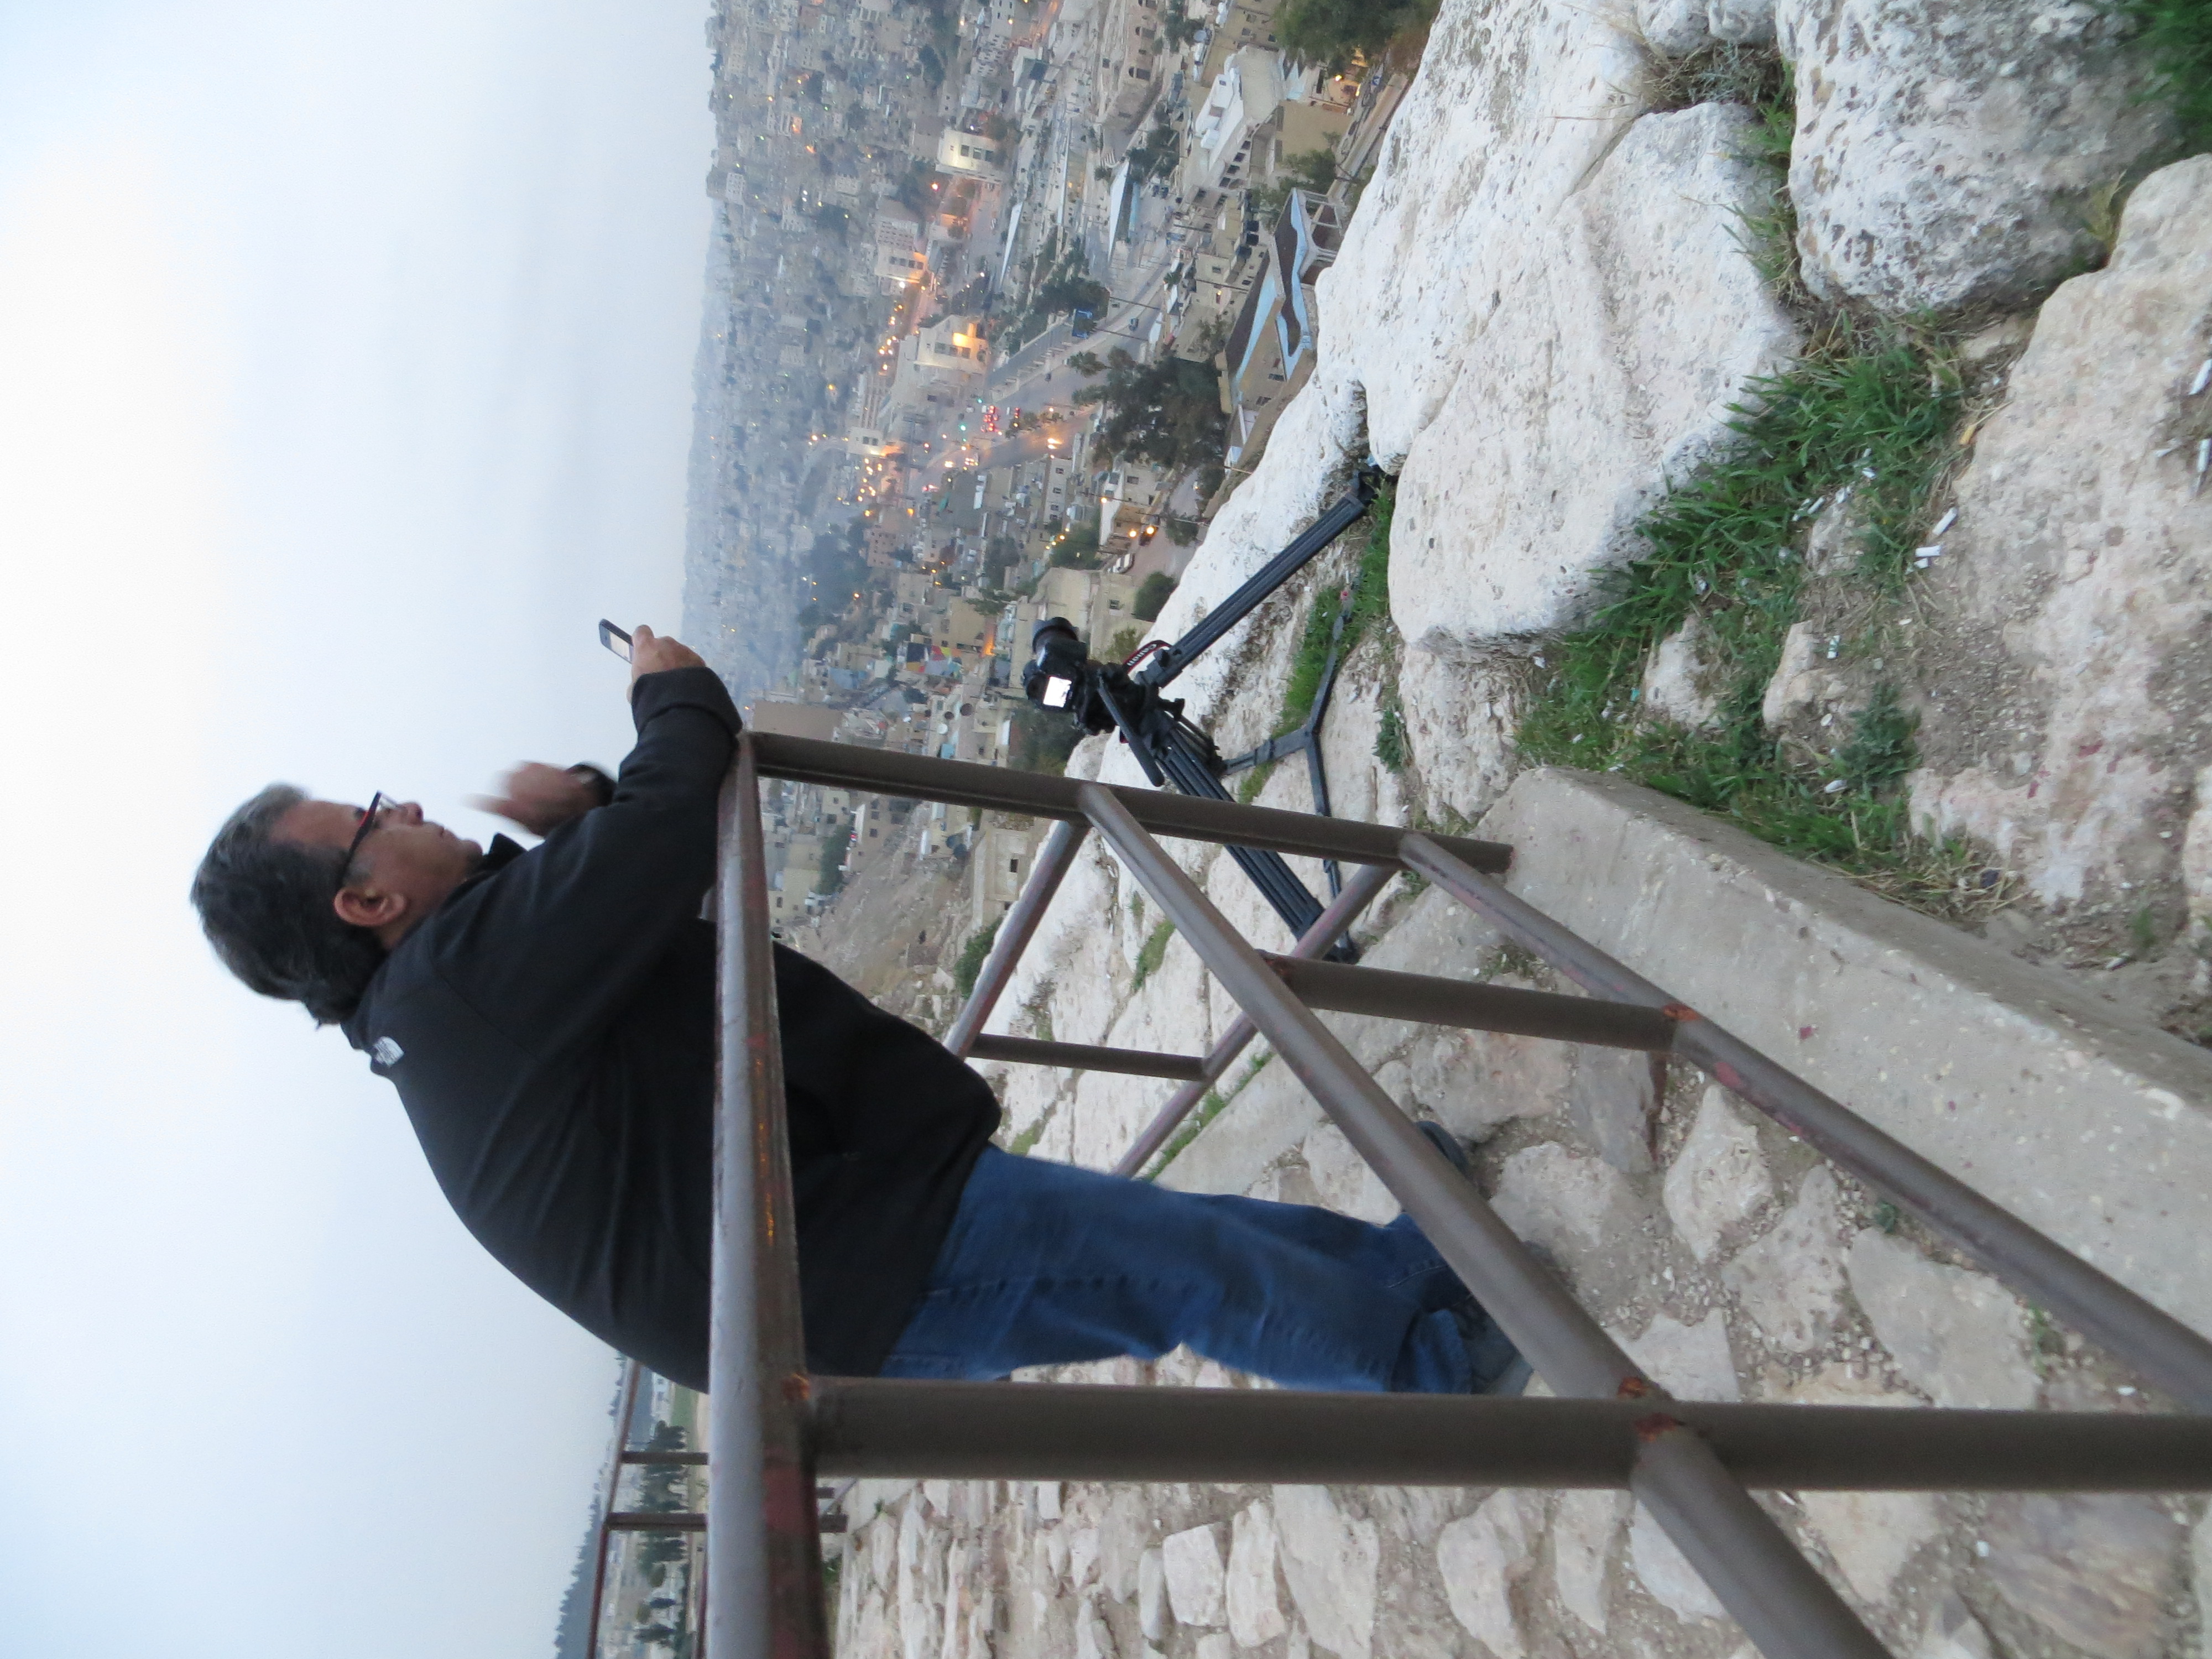 Videographer & Director George Nemeh! Awkward image cold early AM waiting for the sun rise in Capital of Amman Nov 2015 !